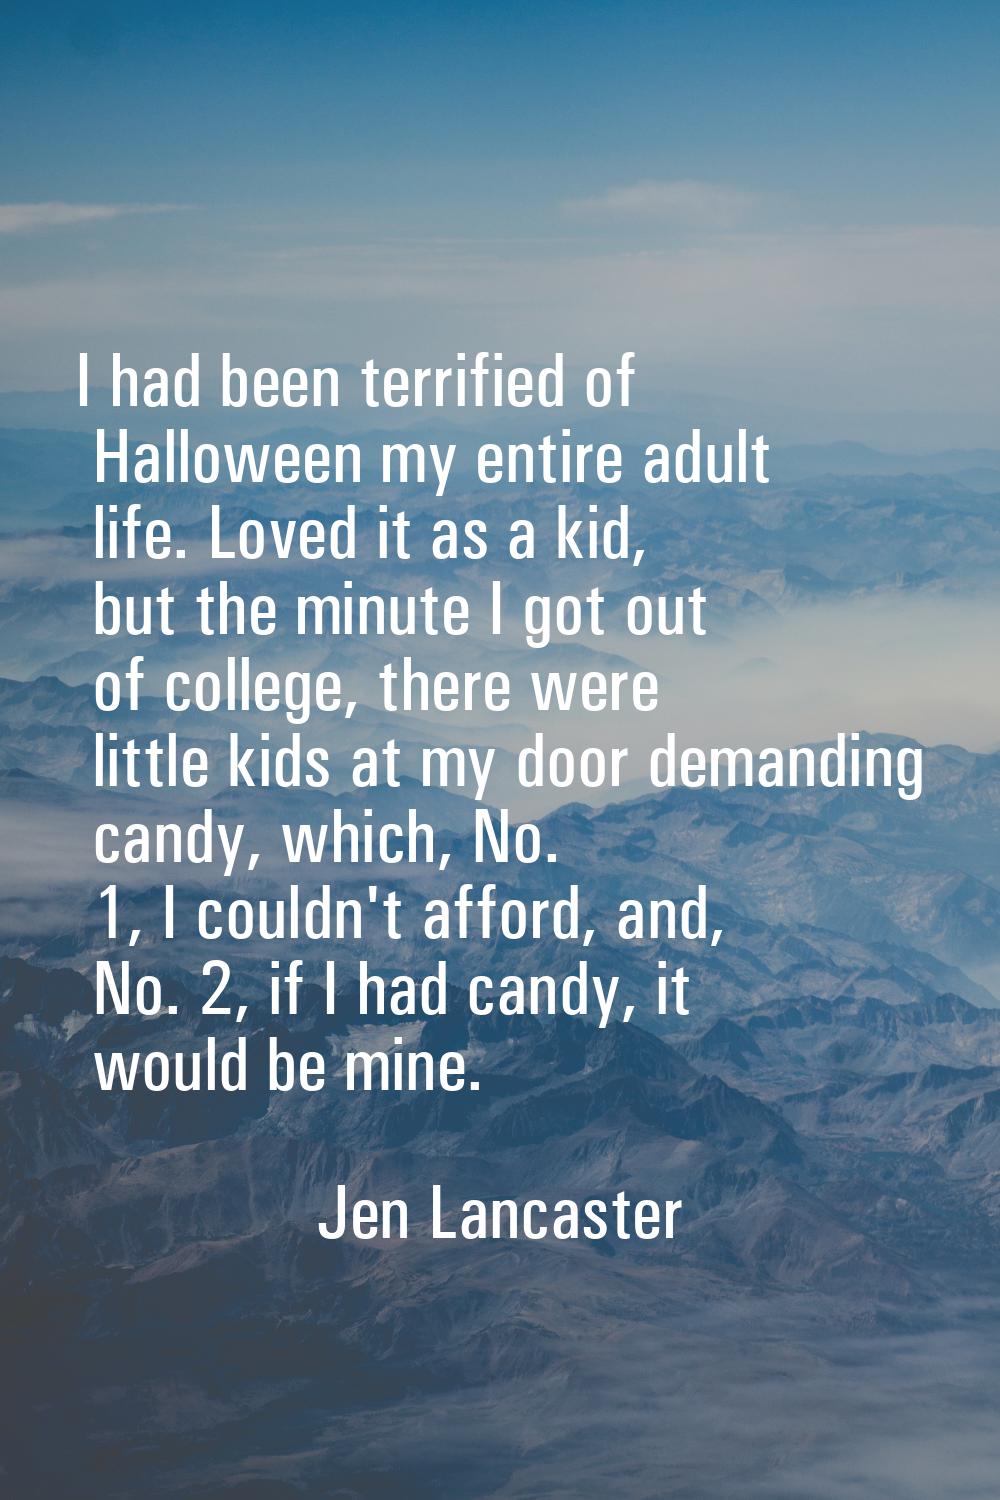 I had been terrified of Halloween my entire adult life. Loved it as a kid, but the minute I got out